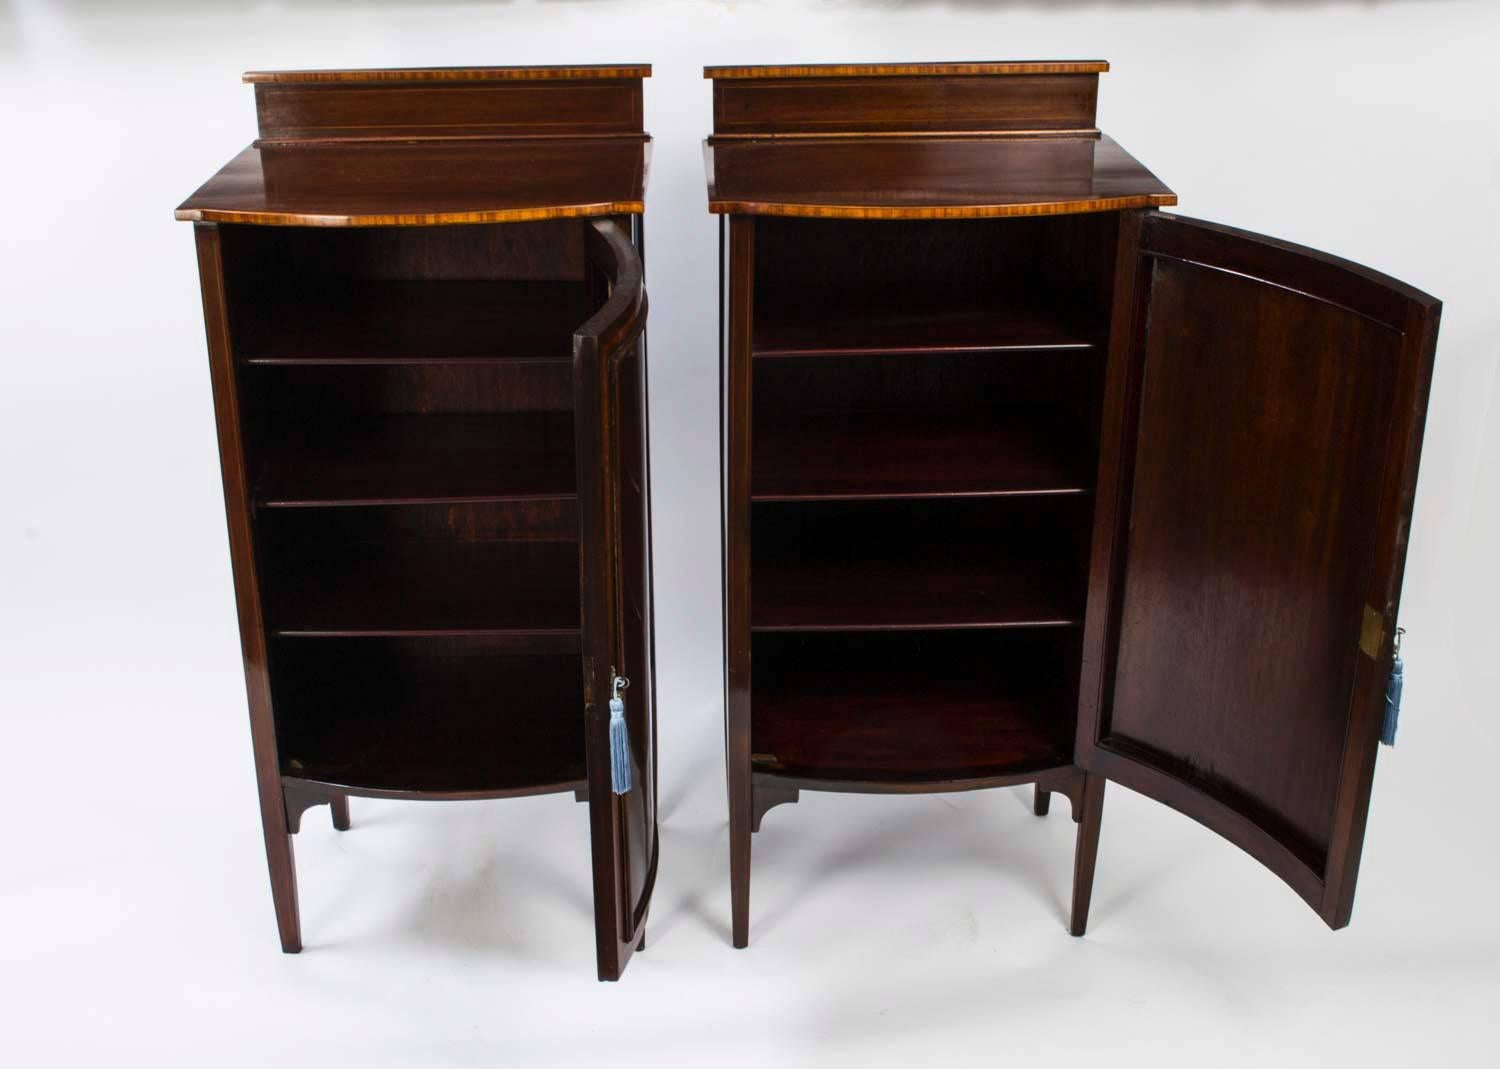 This is a lovely pair of antique Edwardian bow fronted mahogany music cabinets, circa 1900 in date.

The pair has raised backs, feature decorative satinwood inlay of musical instruments to the doors and stand on square tapering legs. 

Each door